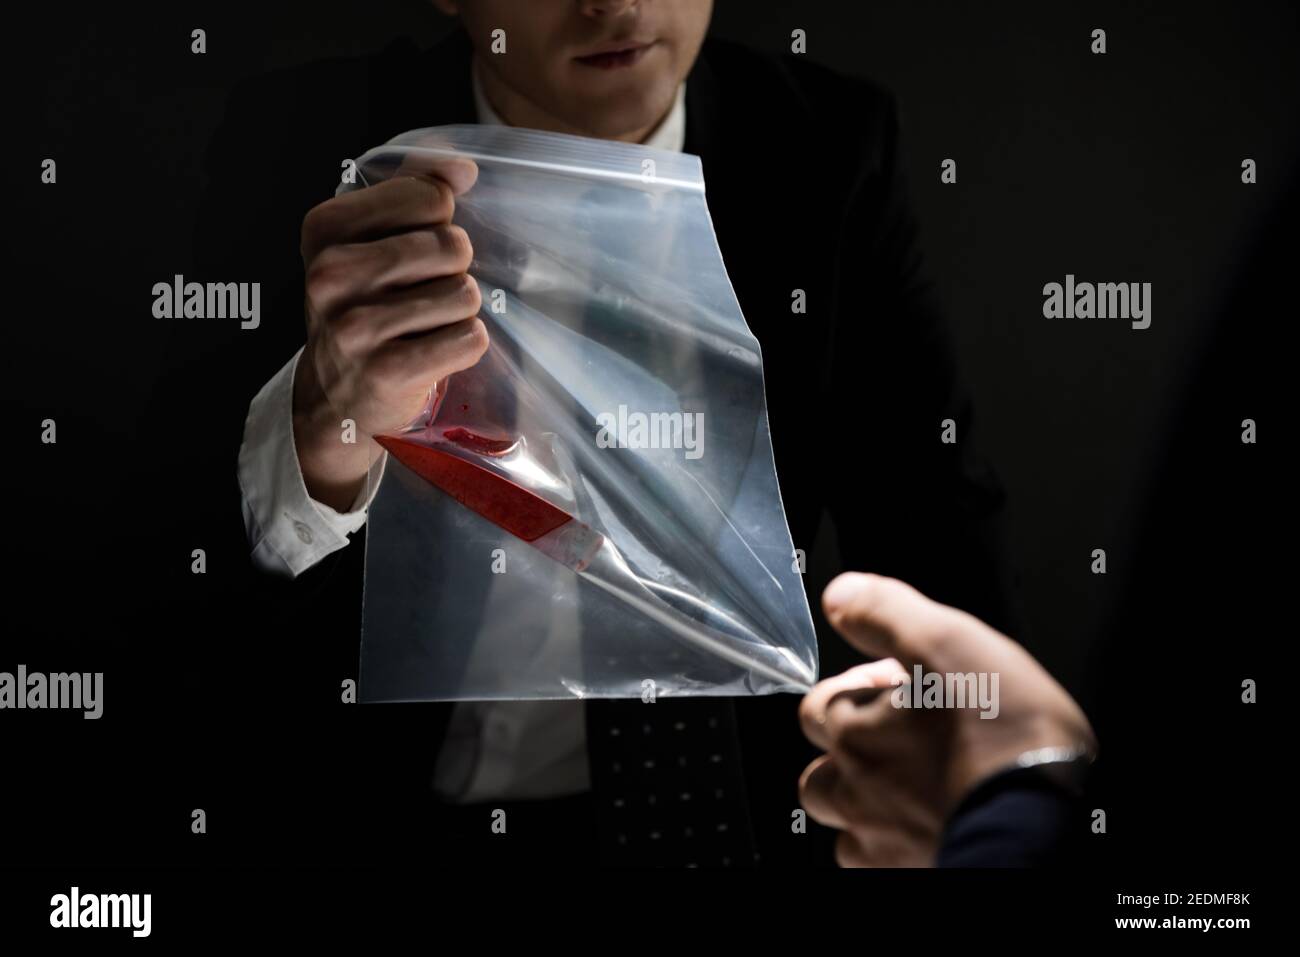 Detective showing a knife with blood as an evidence in crime investigation Stock Photo